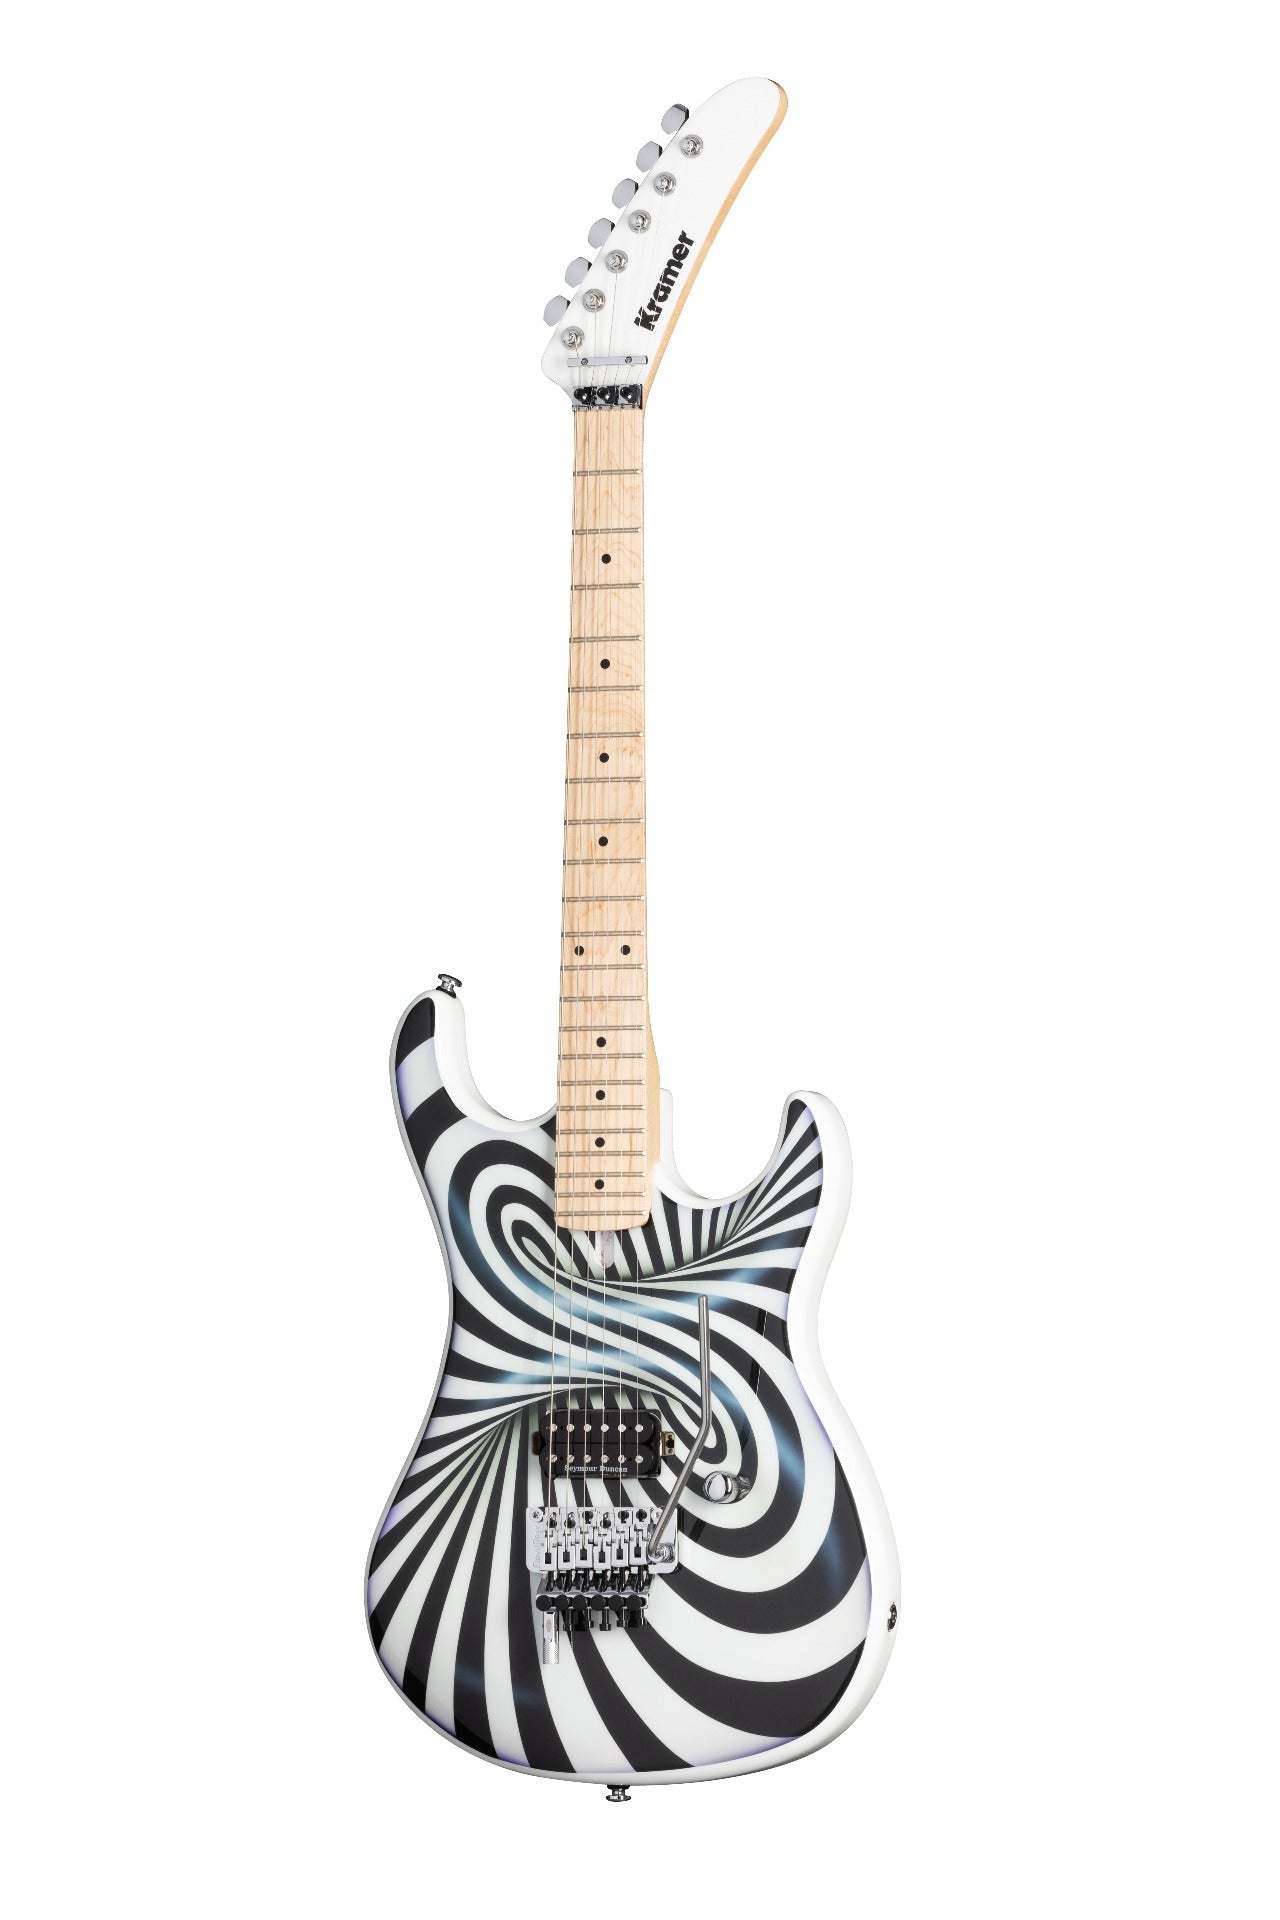 Kramer The 84 Electric Guitar with “The Illusionist” Custom Graphic